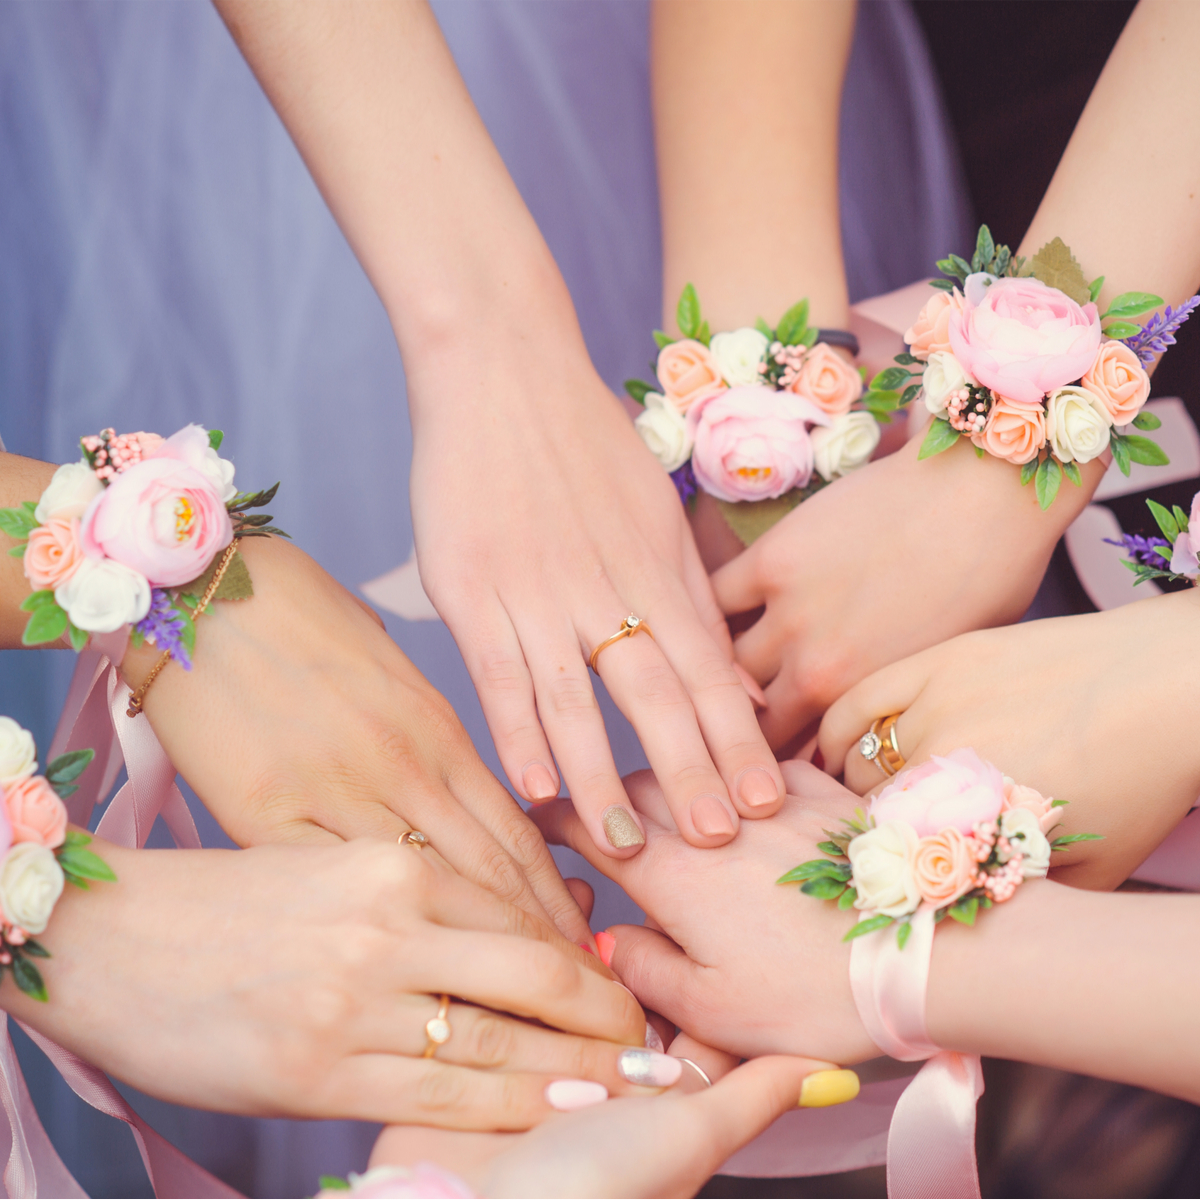 Amazon.com: LESING Wrist Corsage Bracelets with Ribbon Wristband Bridal  Bridesmaid Real Touch Wrist Flowers Hand Flower for Wedding Porm Party  Decor,Set of 6 (Wrist Corsage) : Home & Kitchen